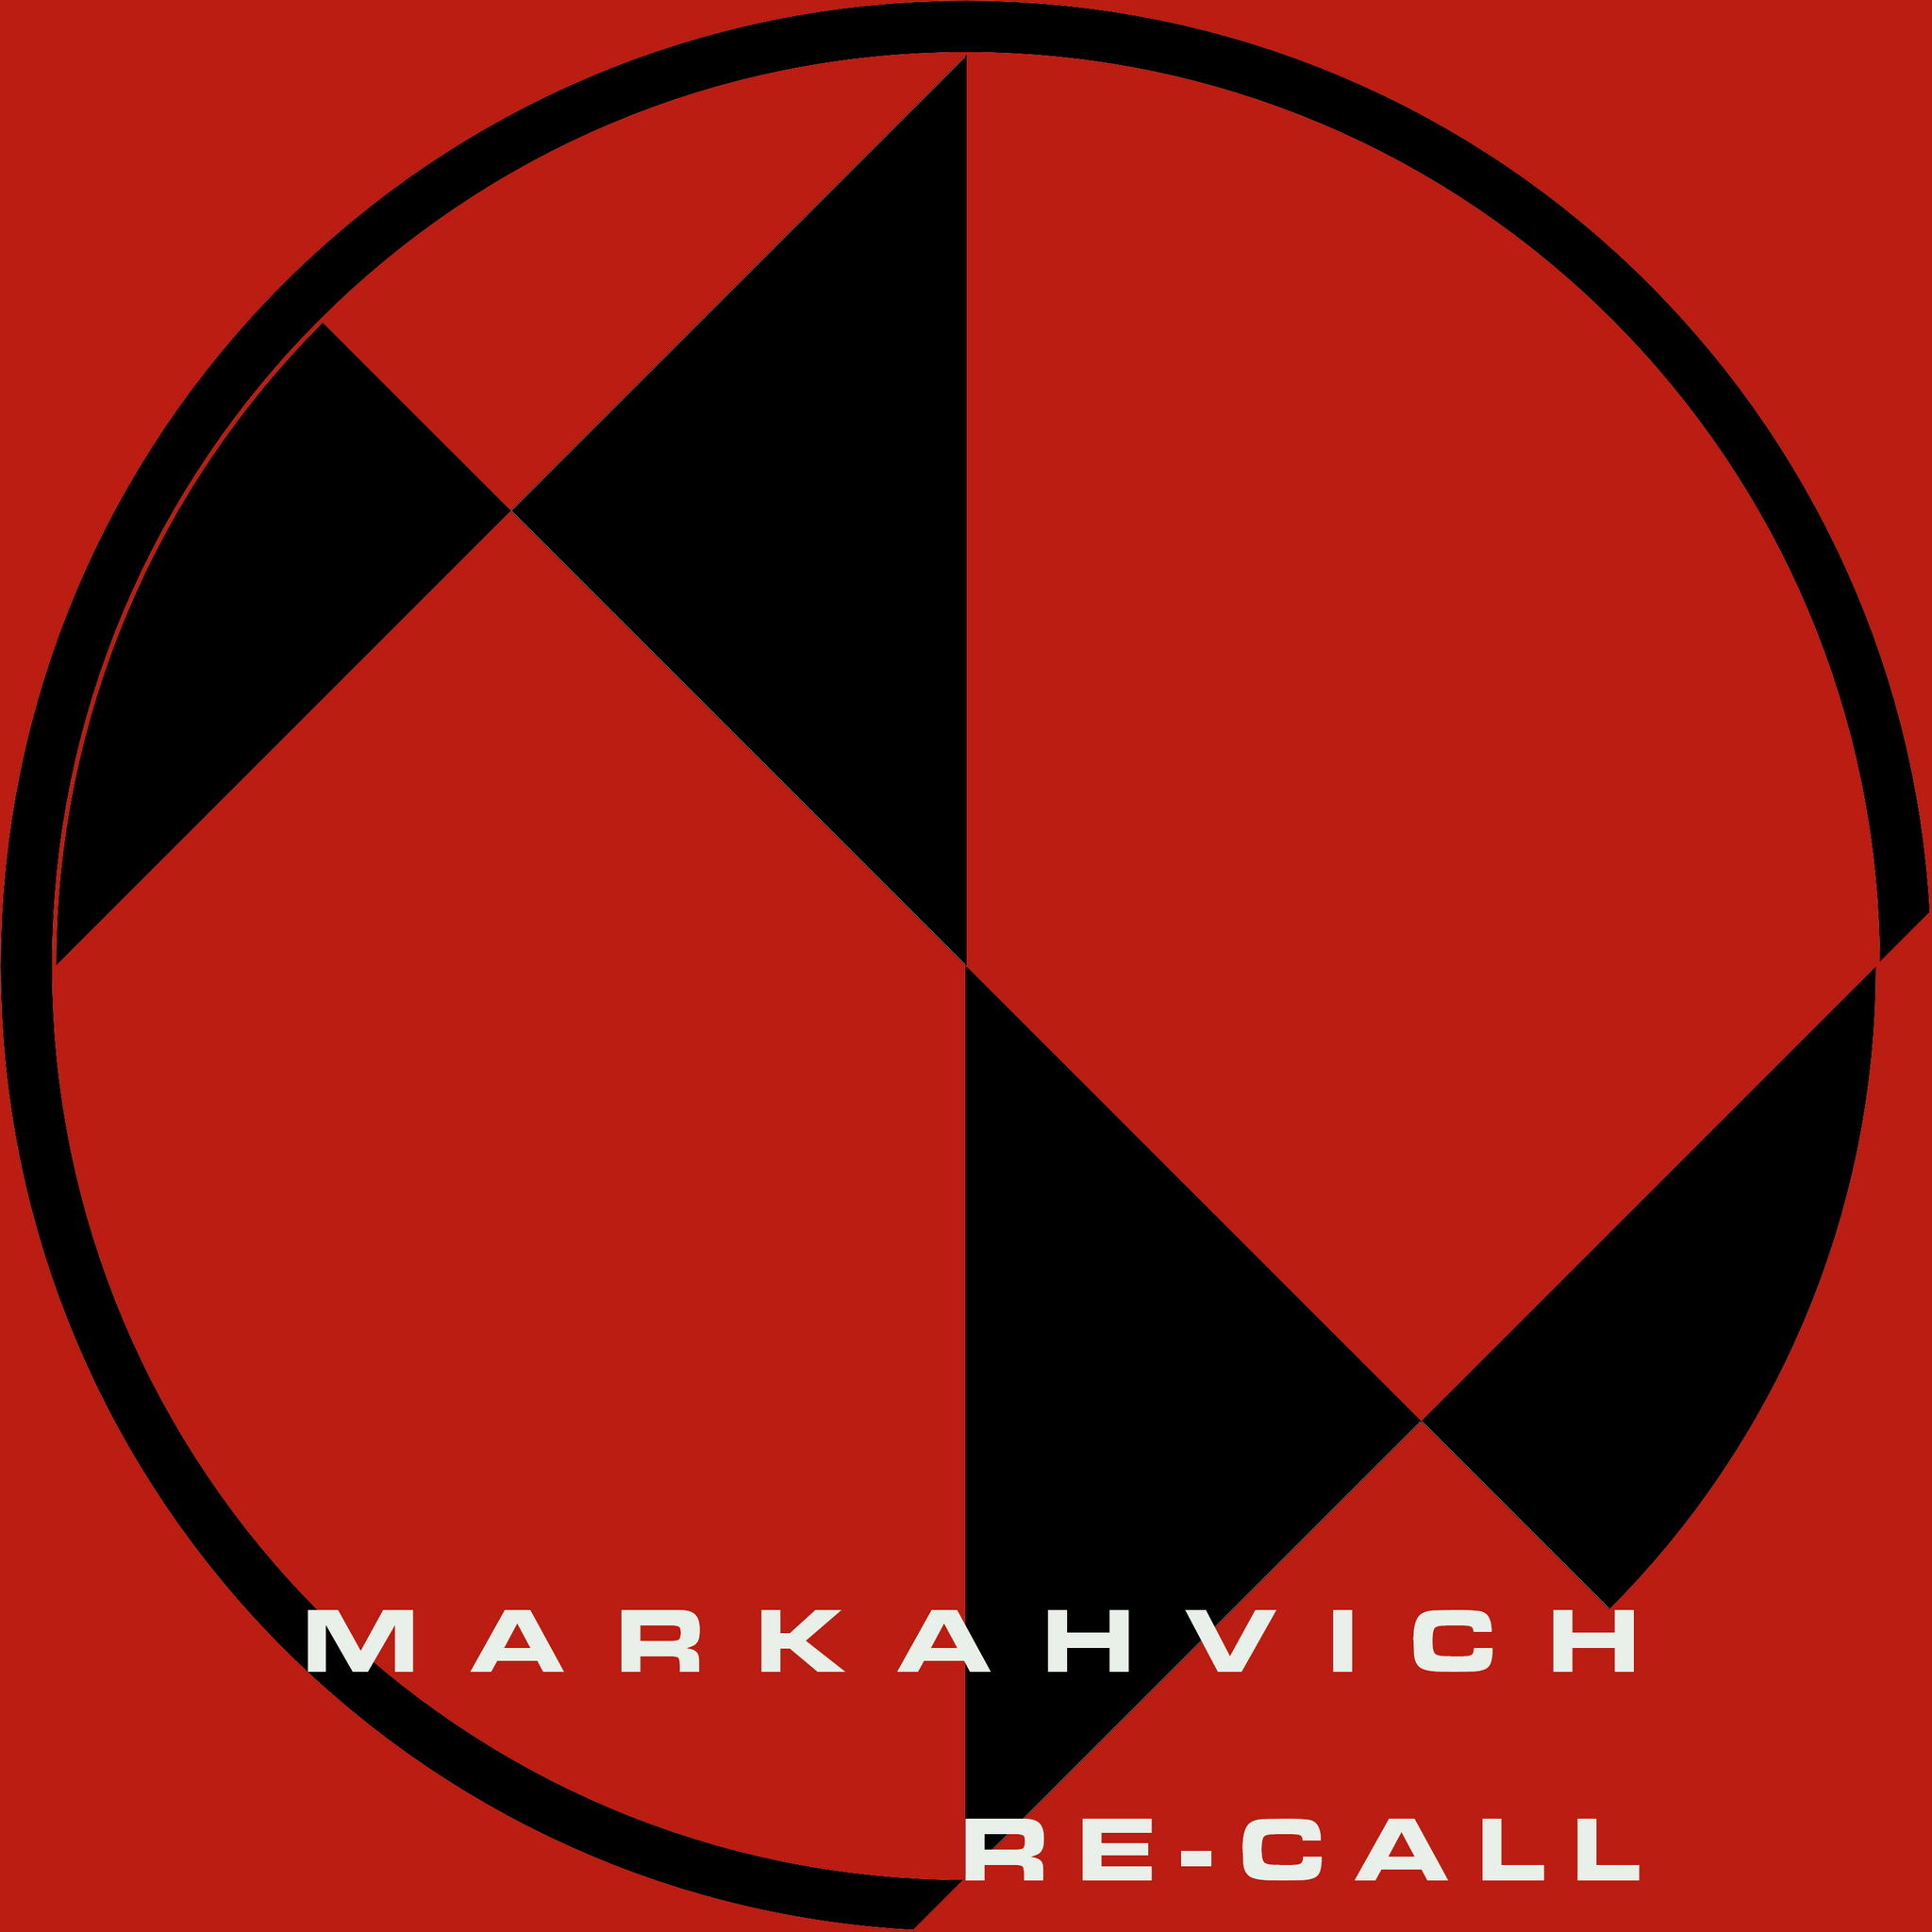 MARKAHVICH 'RE-CALL' 12" (RED VINYL)